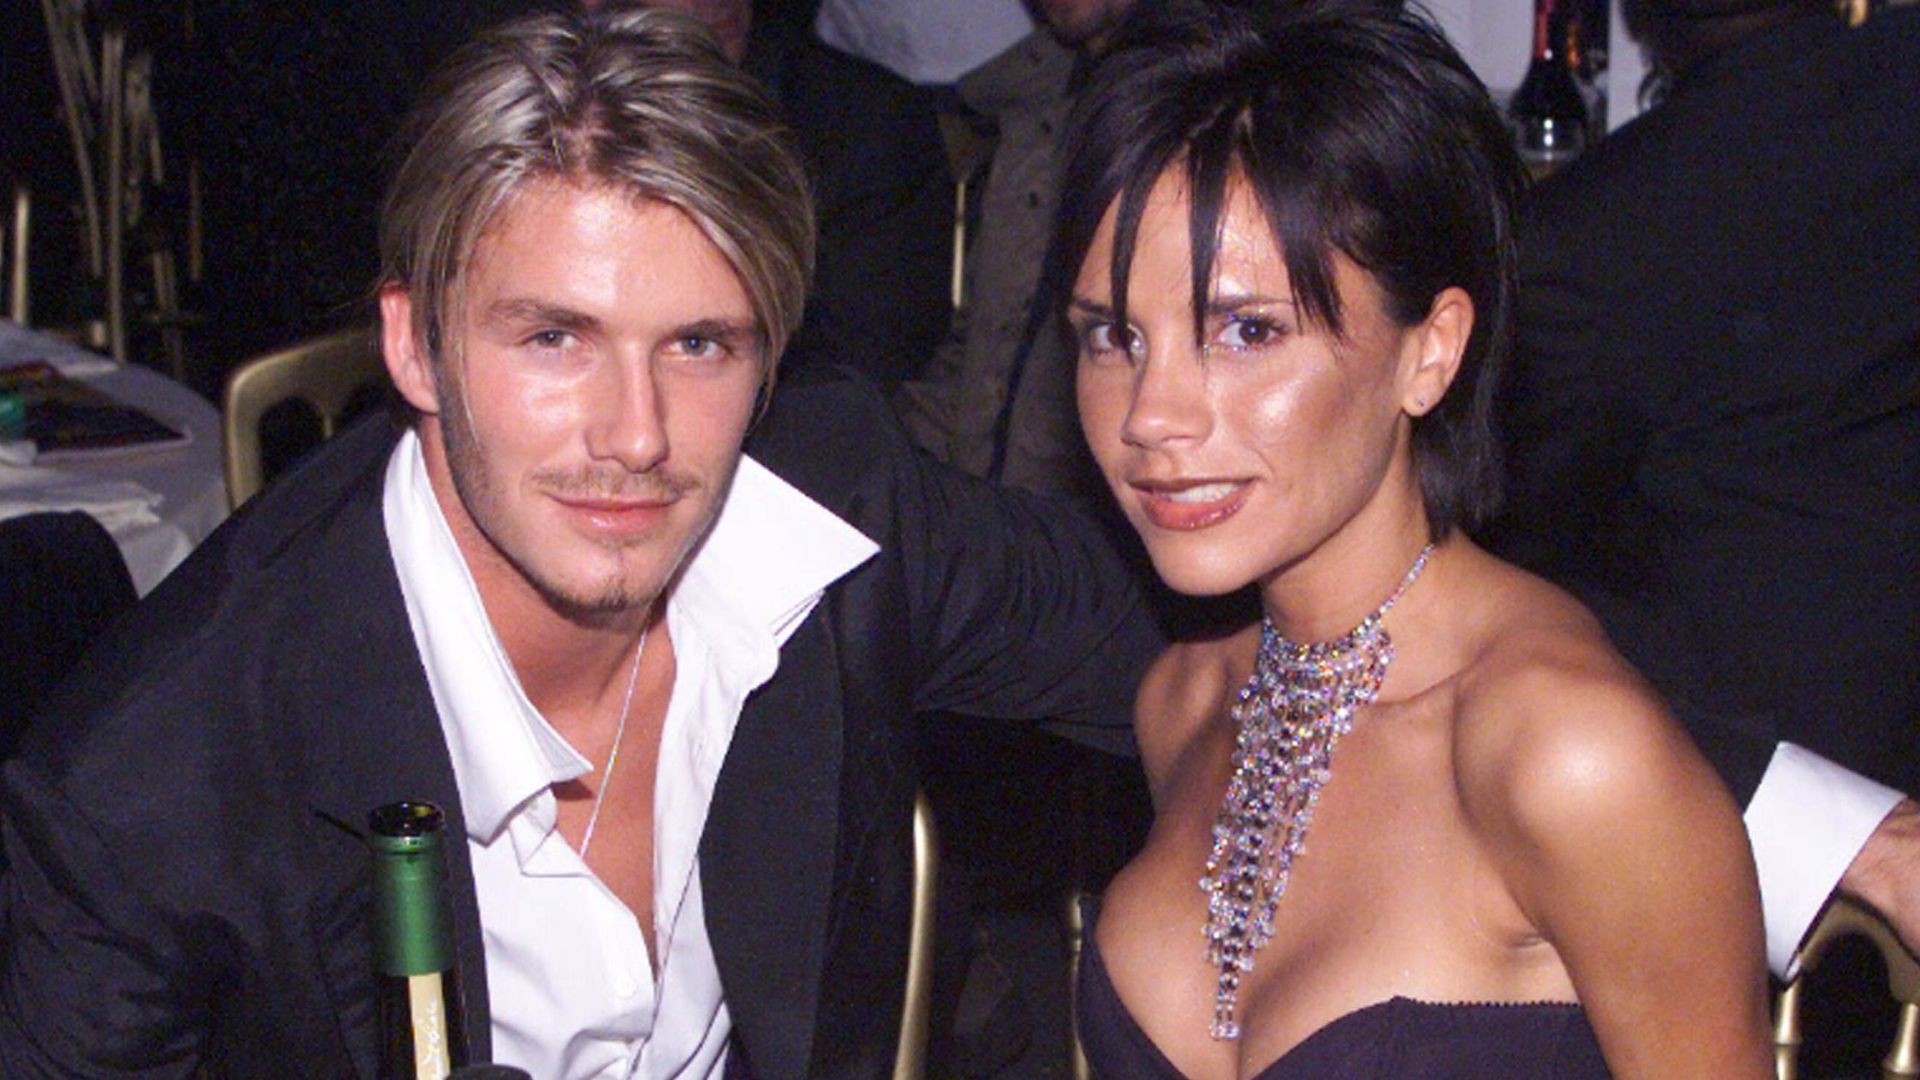 11 Rare Times Victoria Beckham Ditched Her Signature Pout For A Smile